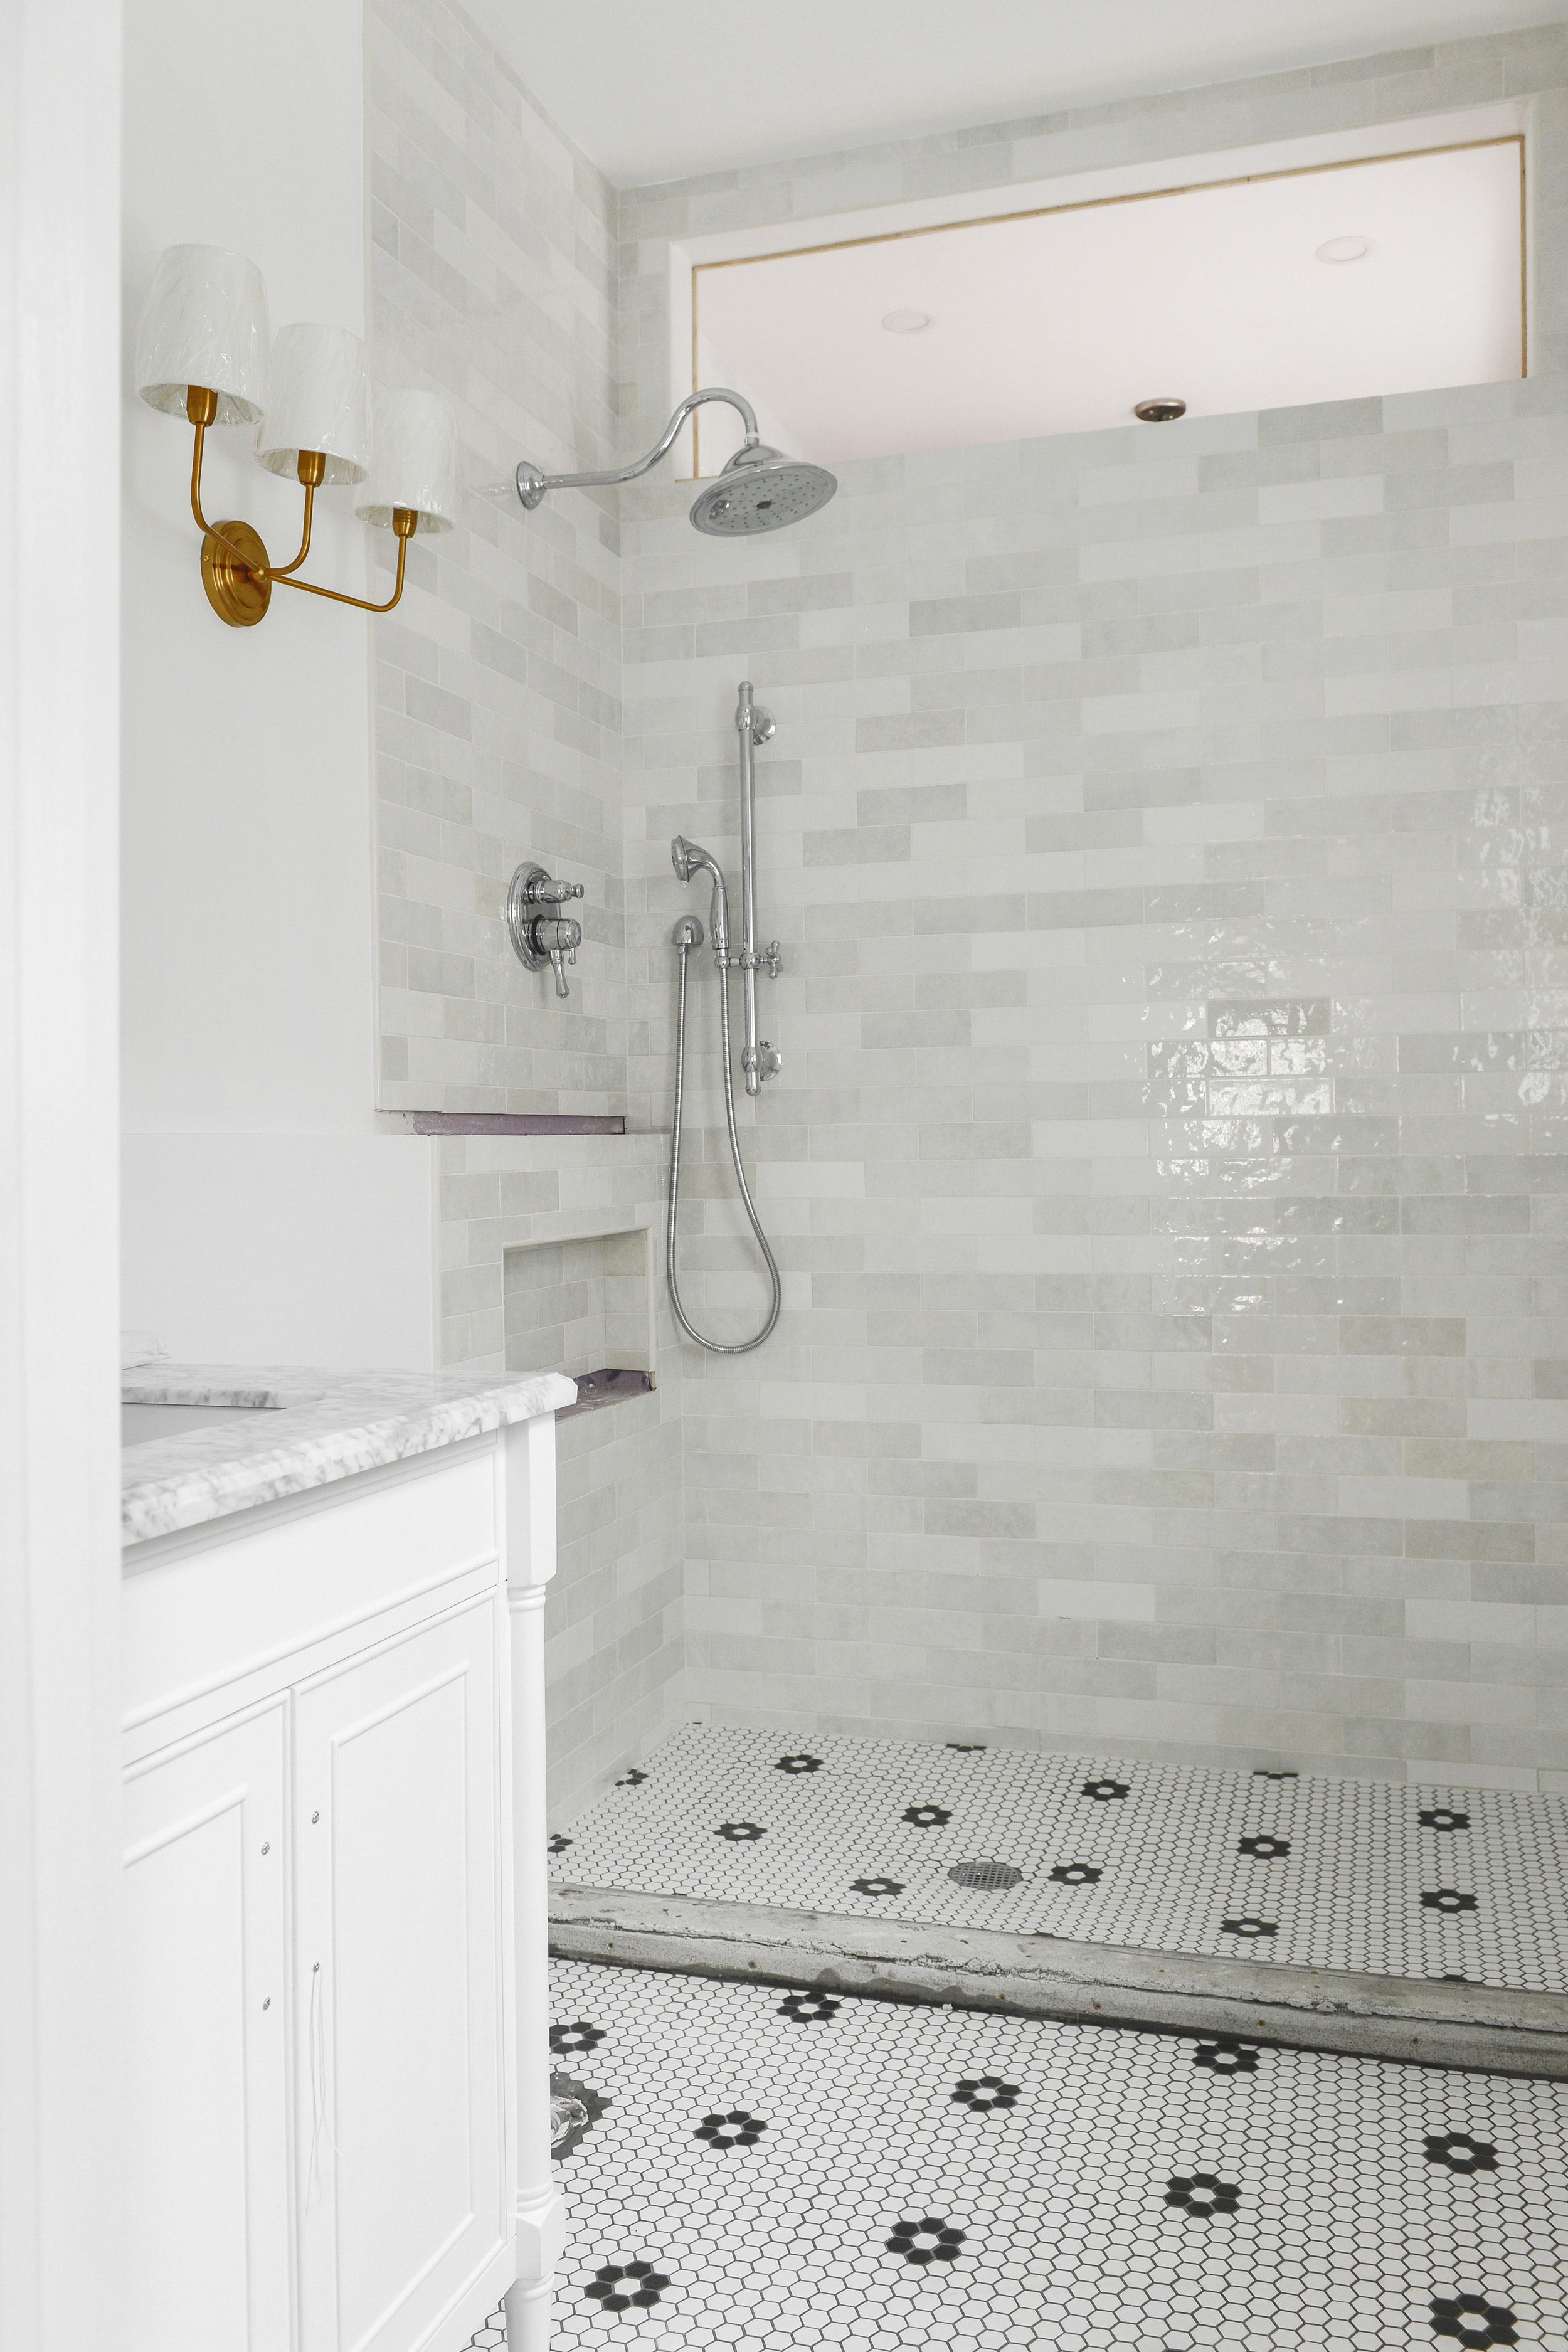 Our bathroom renovation update, which includes brass fixtures and hex tile with rosettes | via Yellow Brick Home